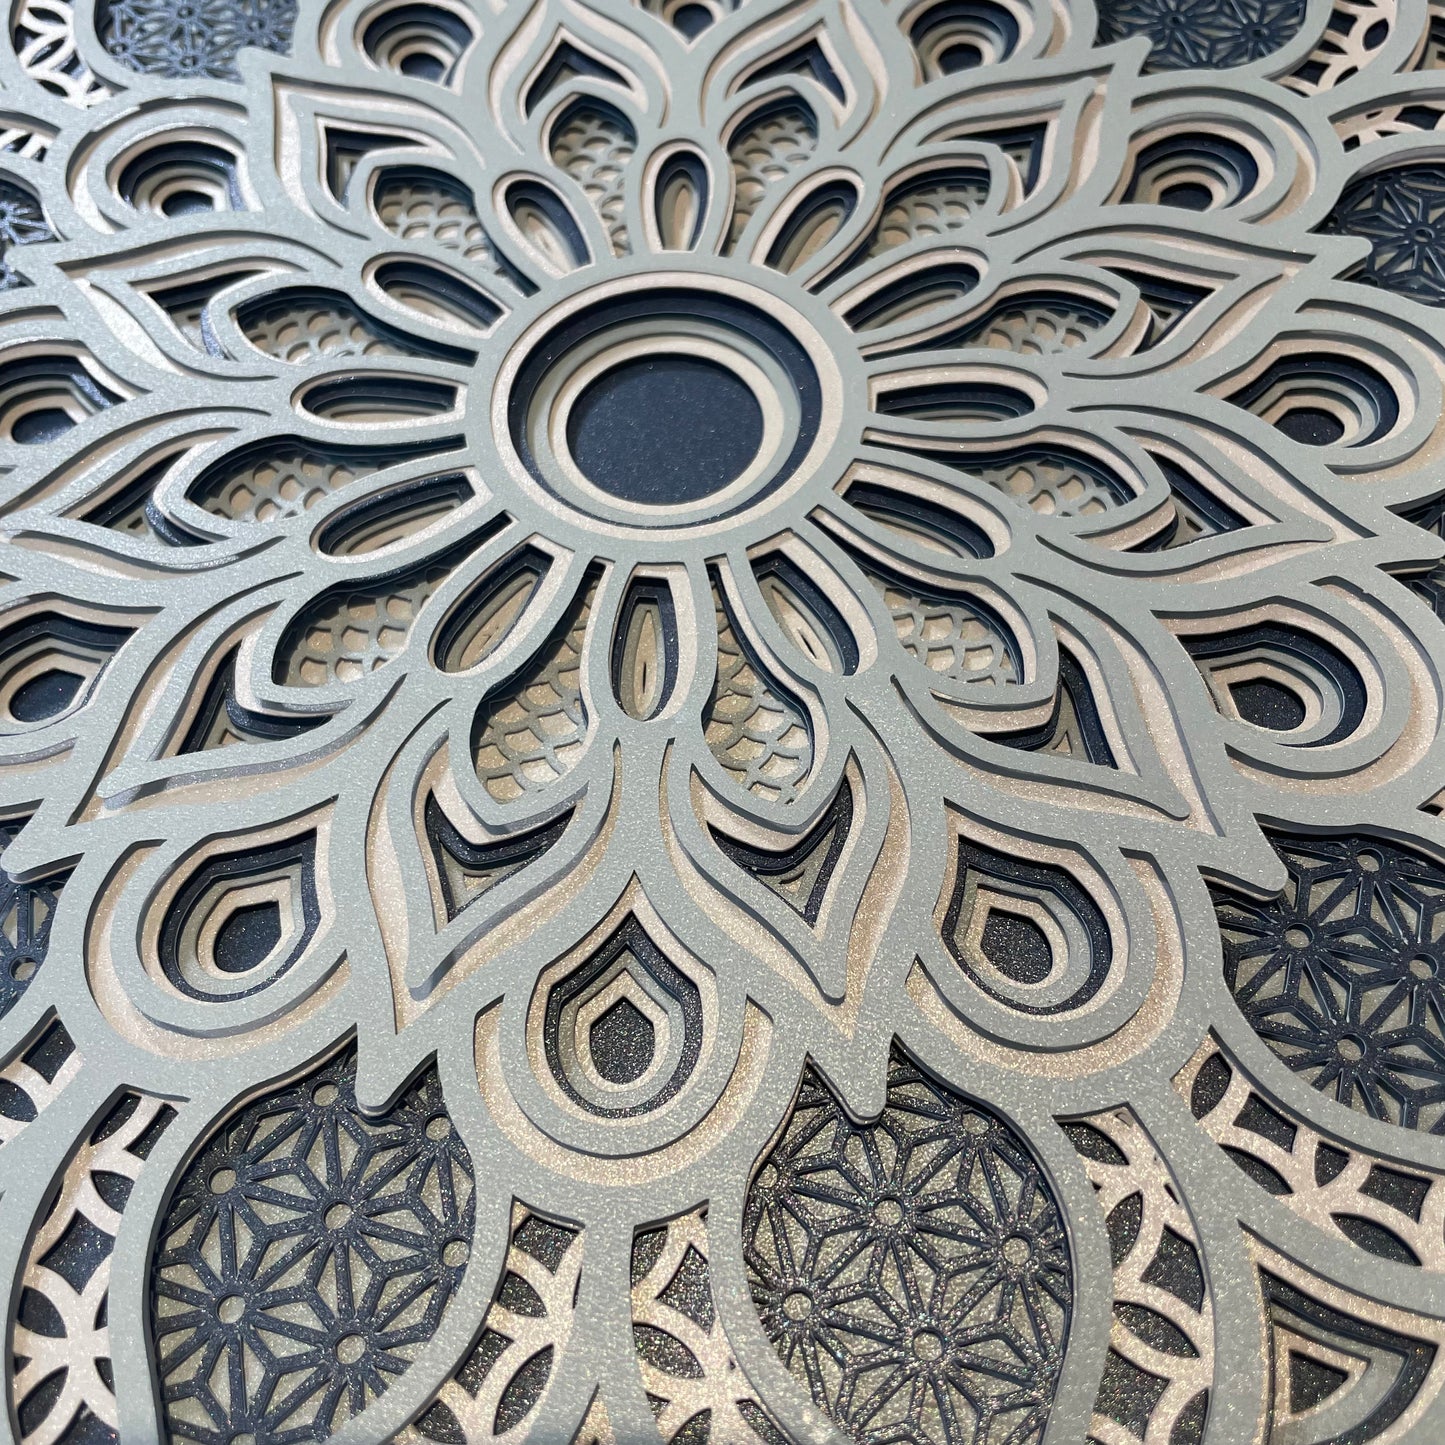 Close up view of 3d Layered Mandala Design.  Instant download svg files for Cricut or Silhouette.  Layered Mandala design can be resized up for larger laser cut Mandalas. Find your favorite layered 3d Mandalas at Home Stitchery Decor